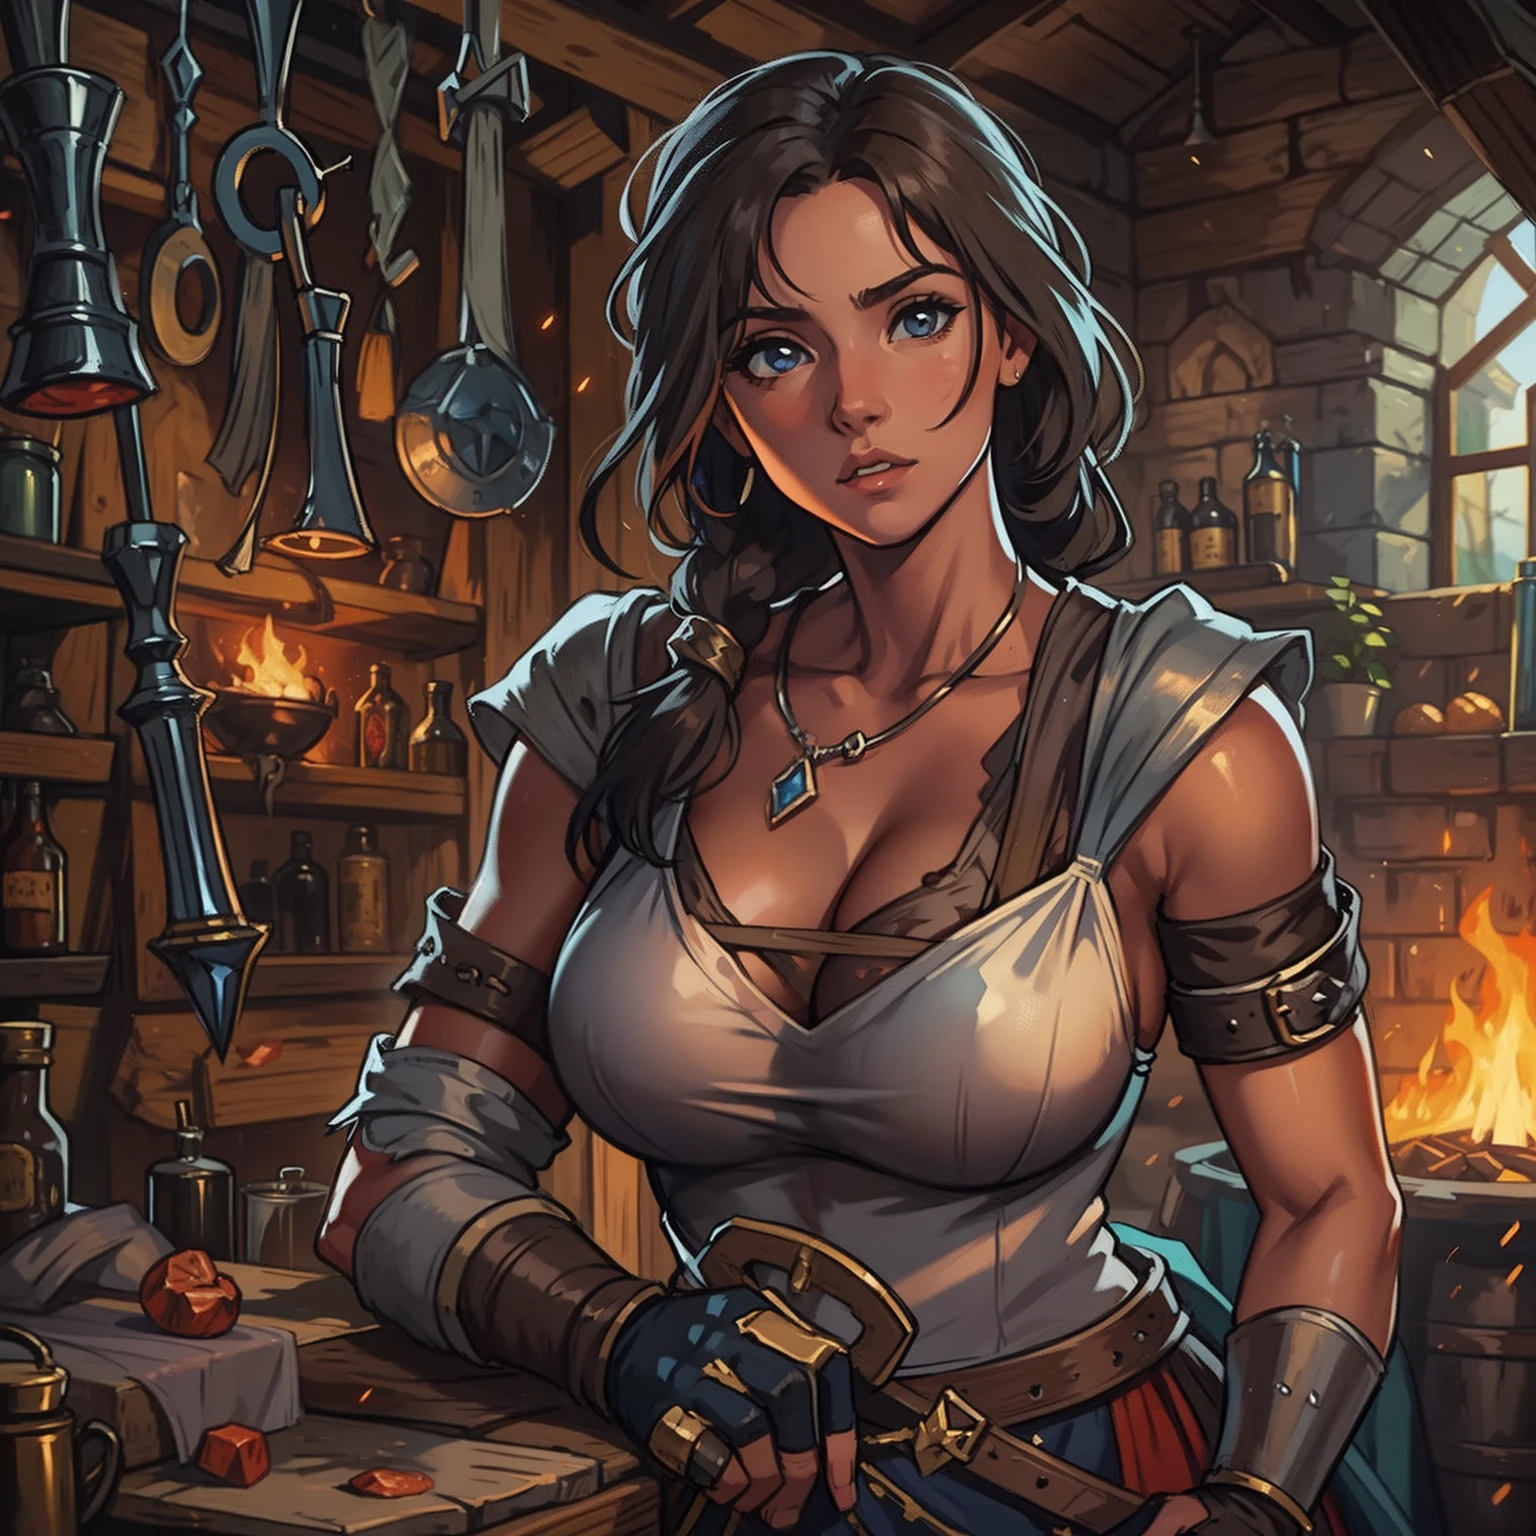 a portrait of a woman she's a sexy blacksmith in a forge with cleavage and  an NPC for a medieval RPG wearing medieval costumes in a medieval art RPG art a rough detail art